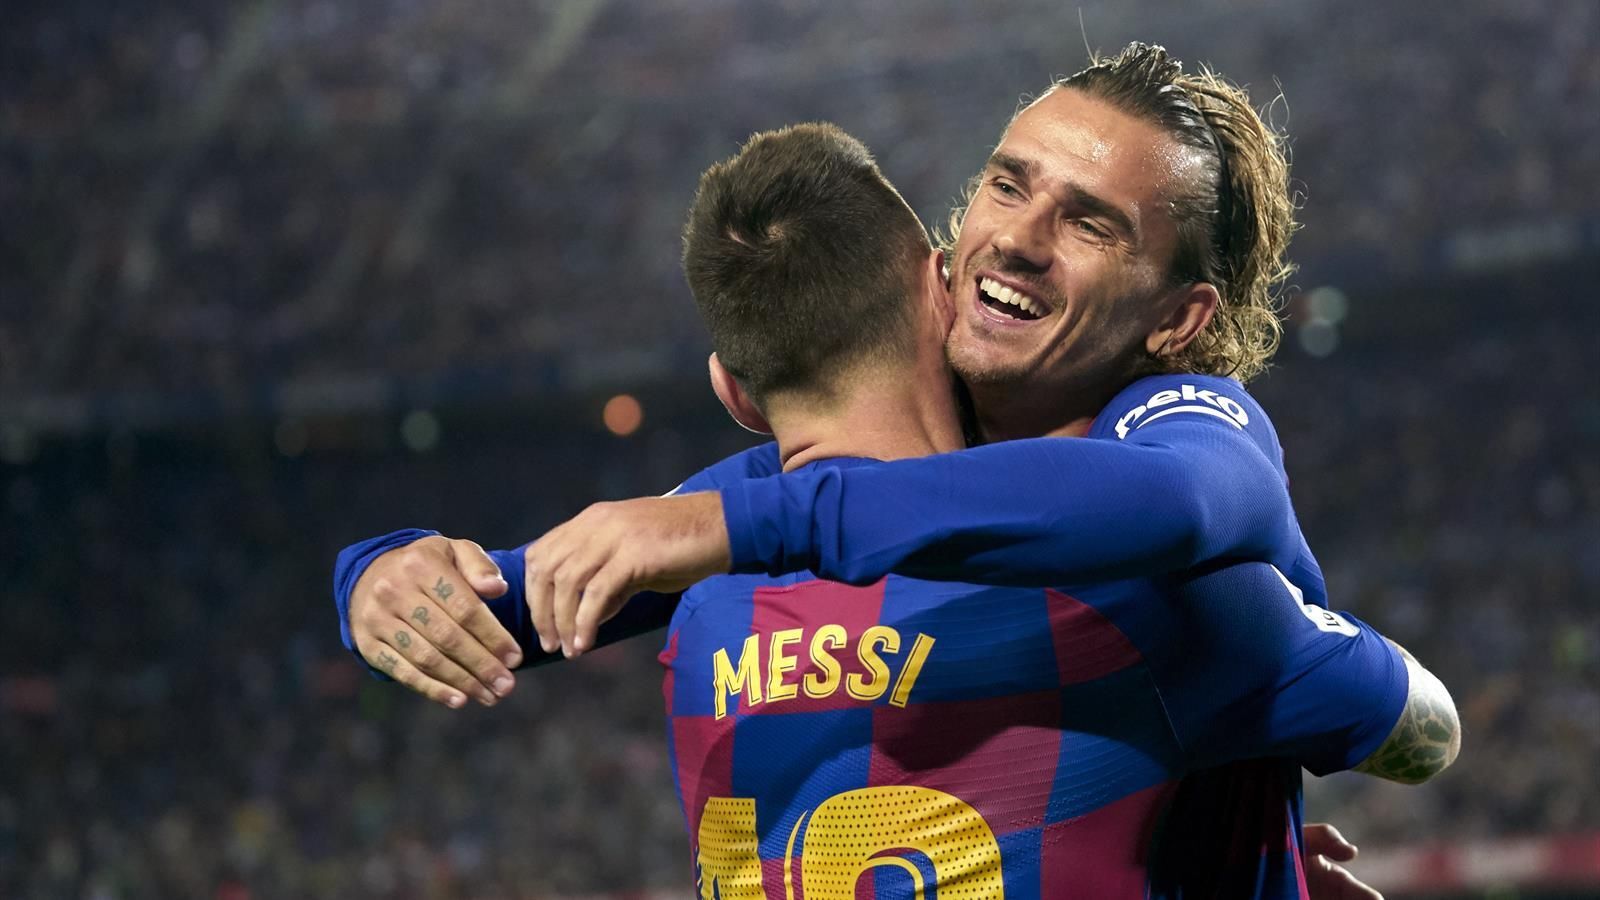 Barcelona Will Definitely Retain Griezmann but Want Him to Improve His Performance